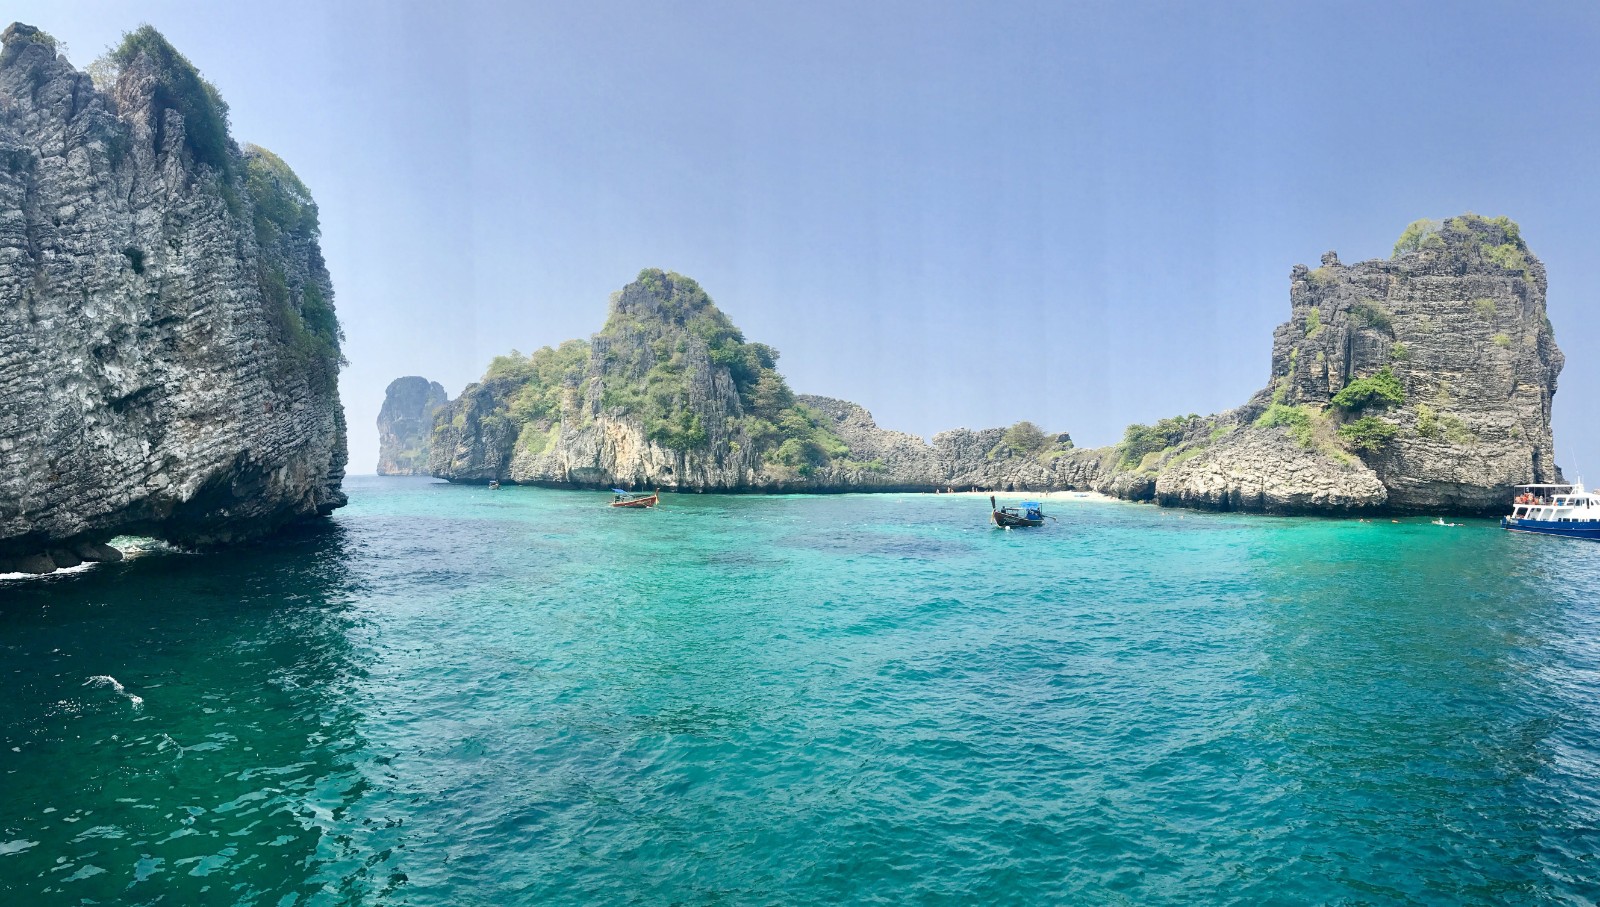 Rock formations rise from turquoise water in the Andaman Coast